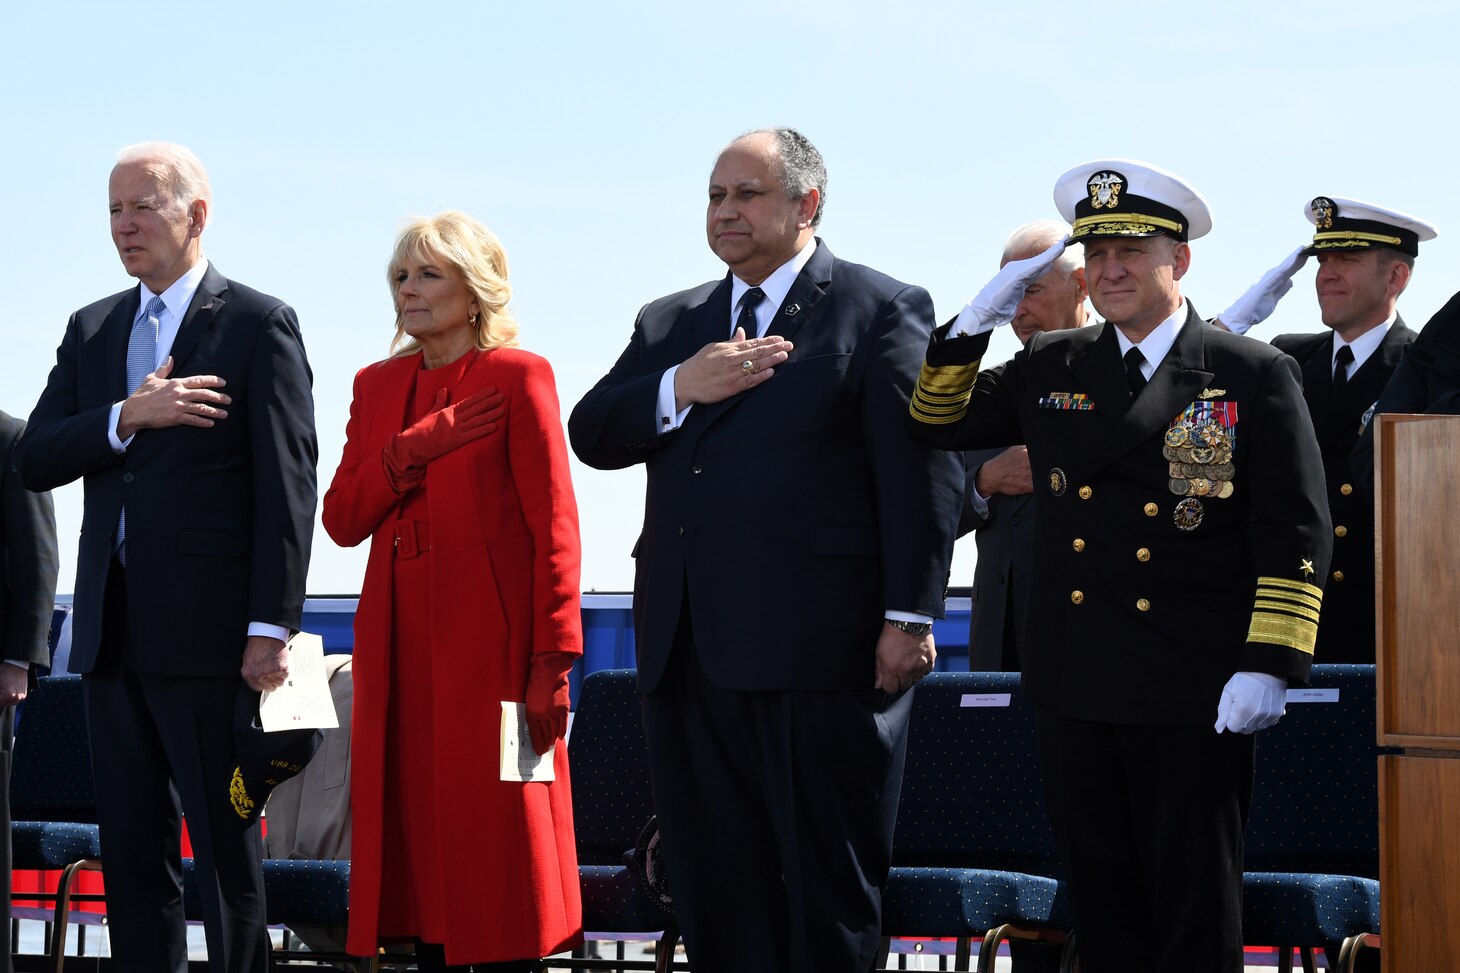 President of the United States Joe Biden, First Lady Jill Biden, Secretary of the Navy Carlos Del Toro, and Chief of Naval Operations Adm. Mike Gilday stand during the national anthem during a commissioning commemoration ceremony for the Virginia-class submarine USS Delaware (SSN 791) in Wilmington, Delaware April 2, 2022.